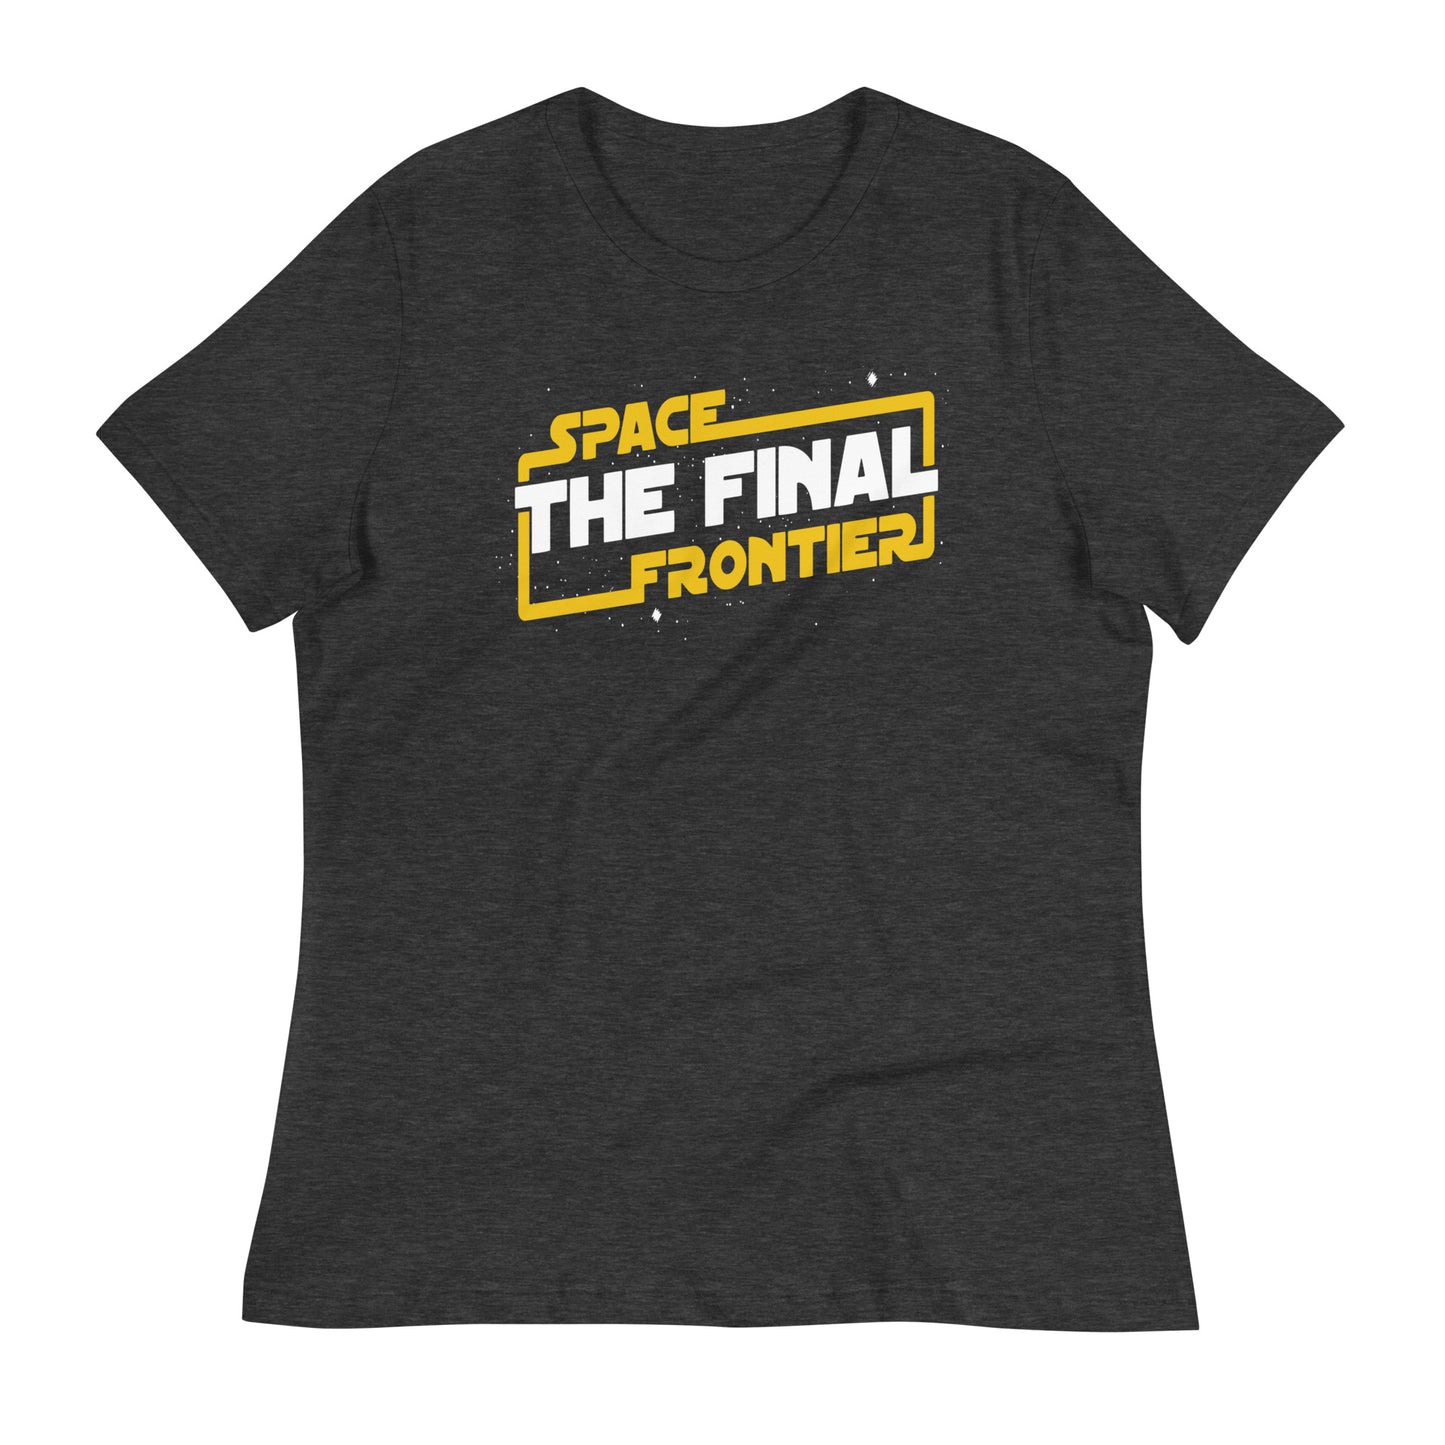 Space The Final Frontier Women's Signature Tee